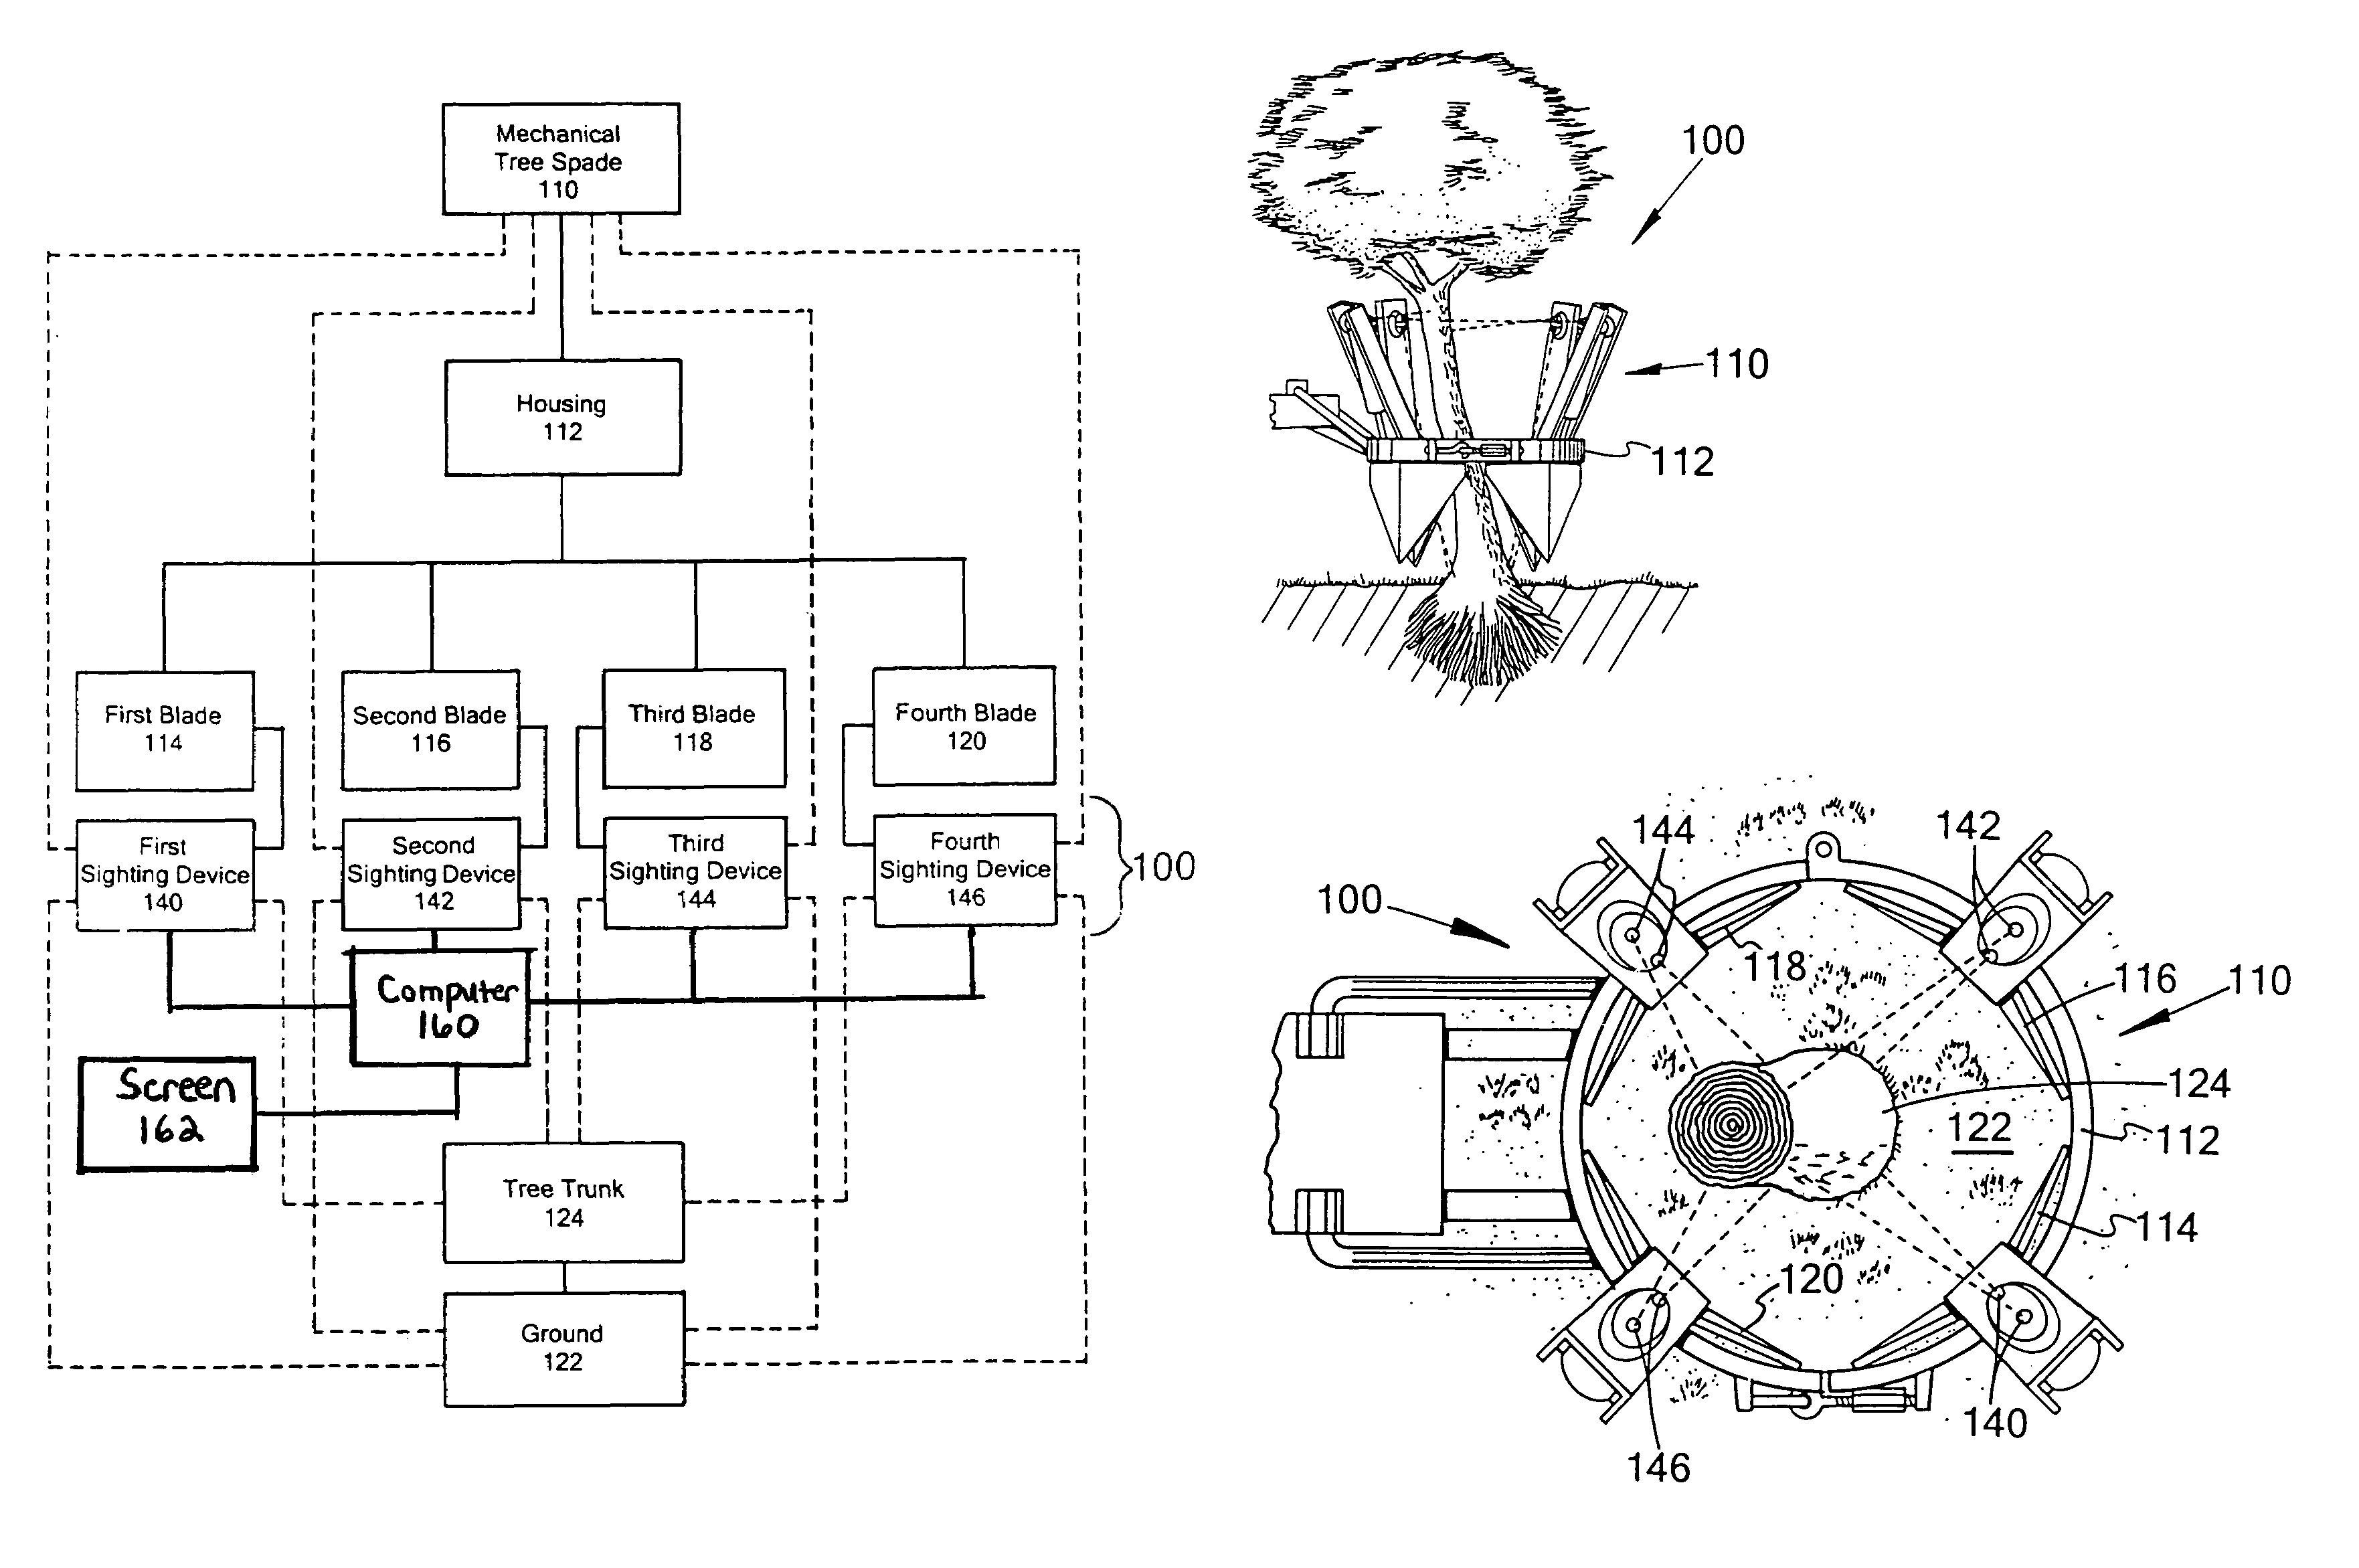 Automated tree spade centering device